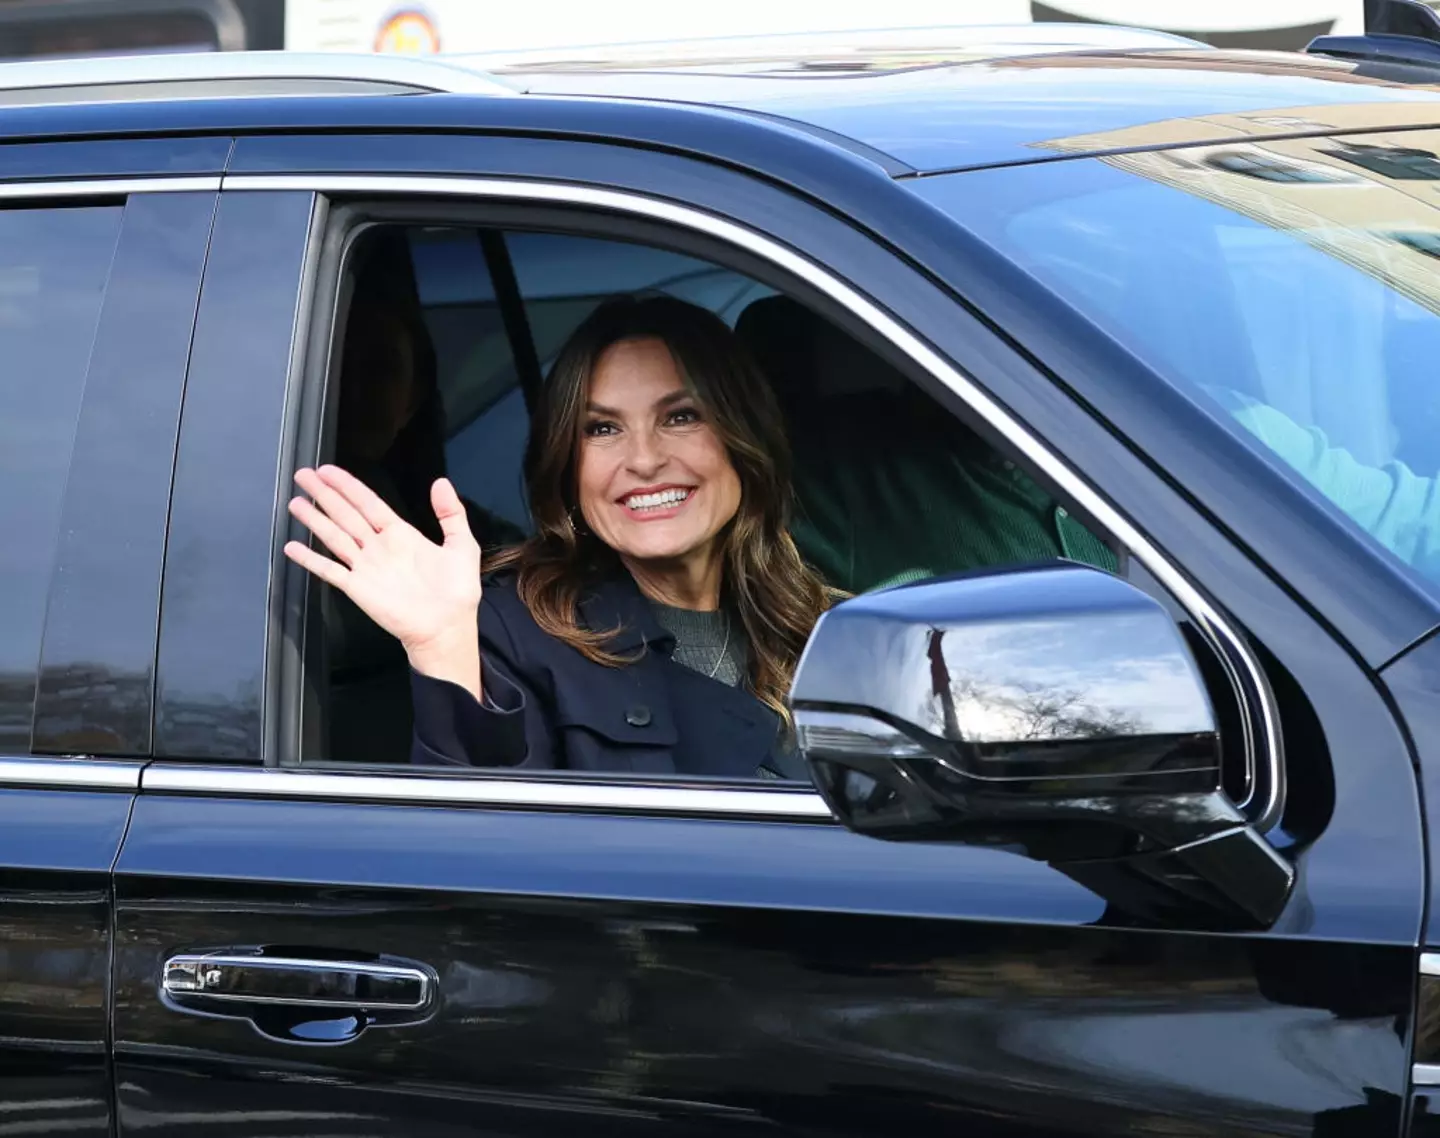 Mariska Hargitay was able to help reunite the little girl with her mom. (Jose Perez/Bauer-Griffin/GC Images)